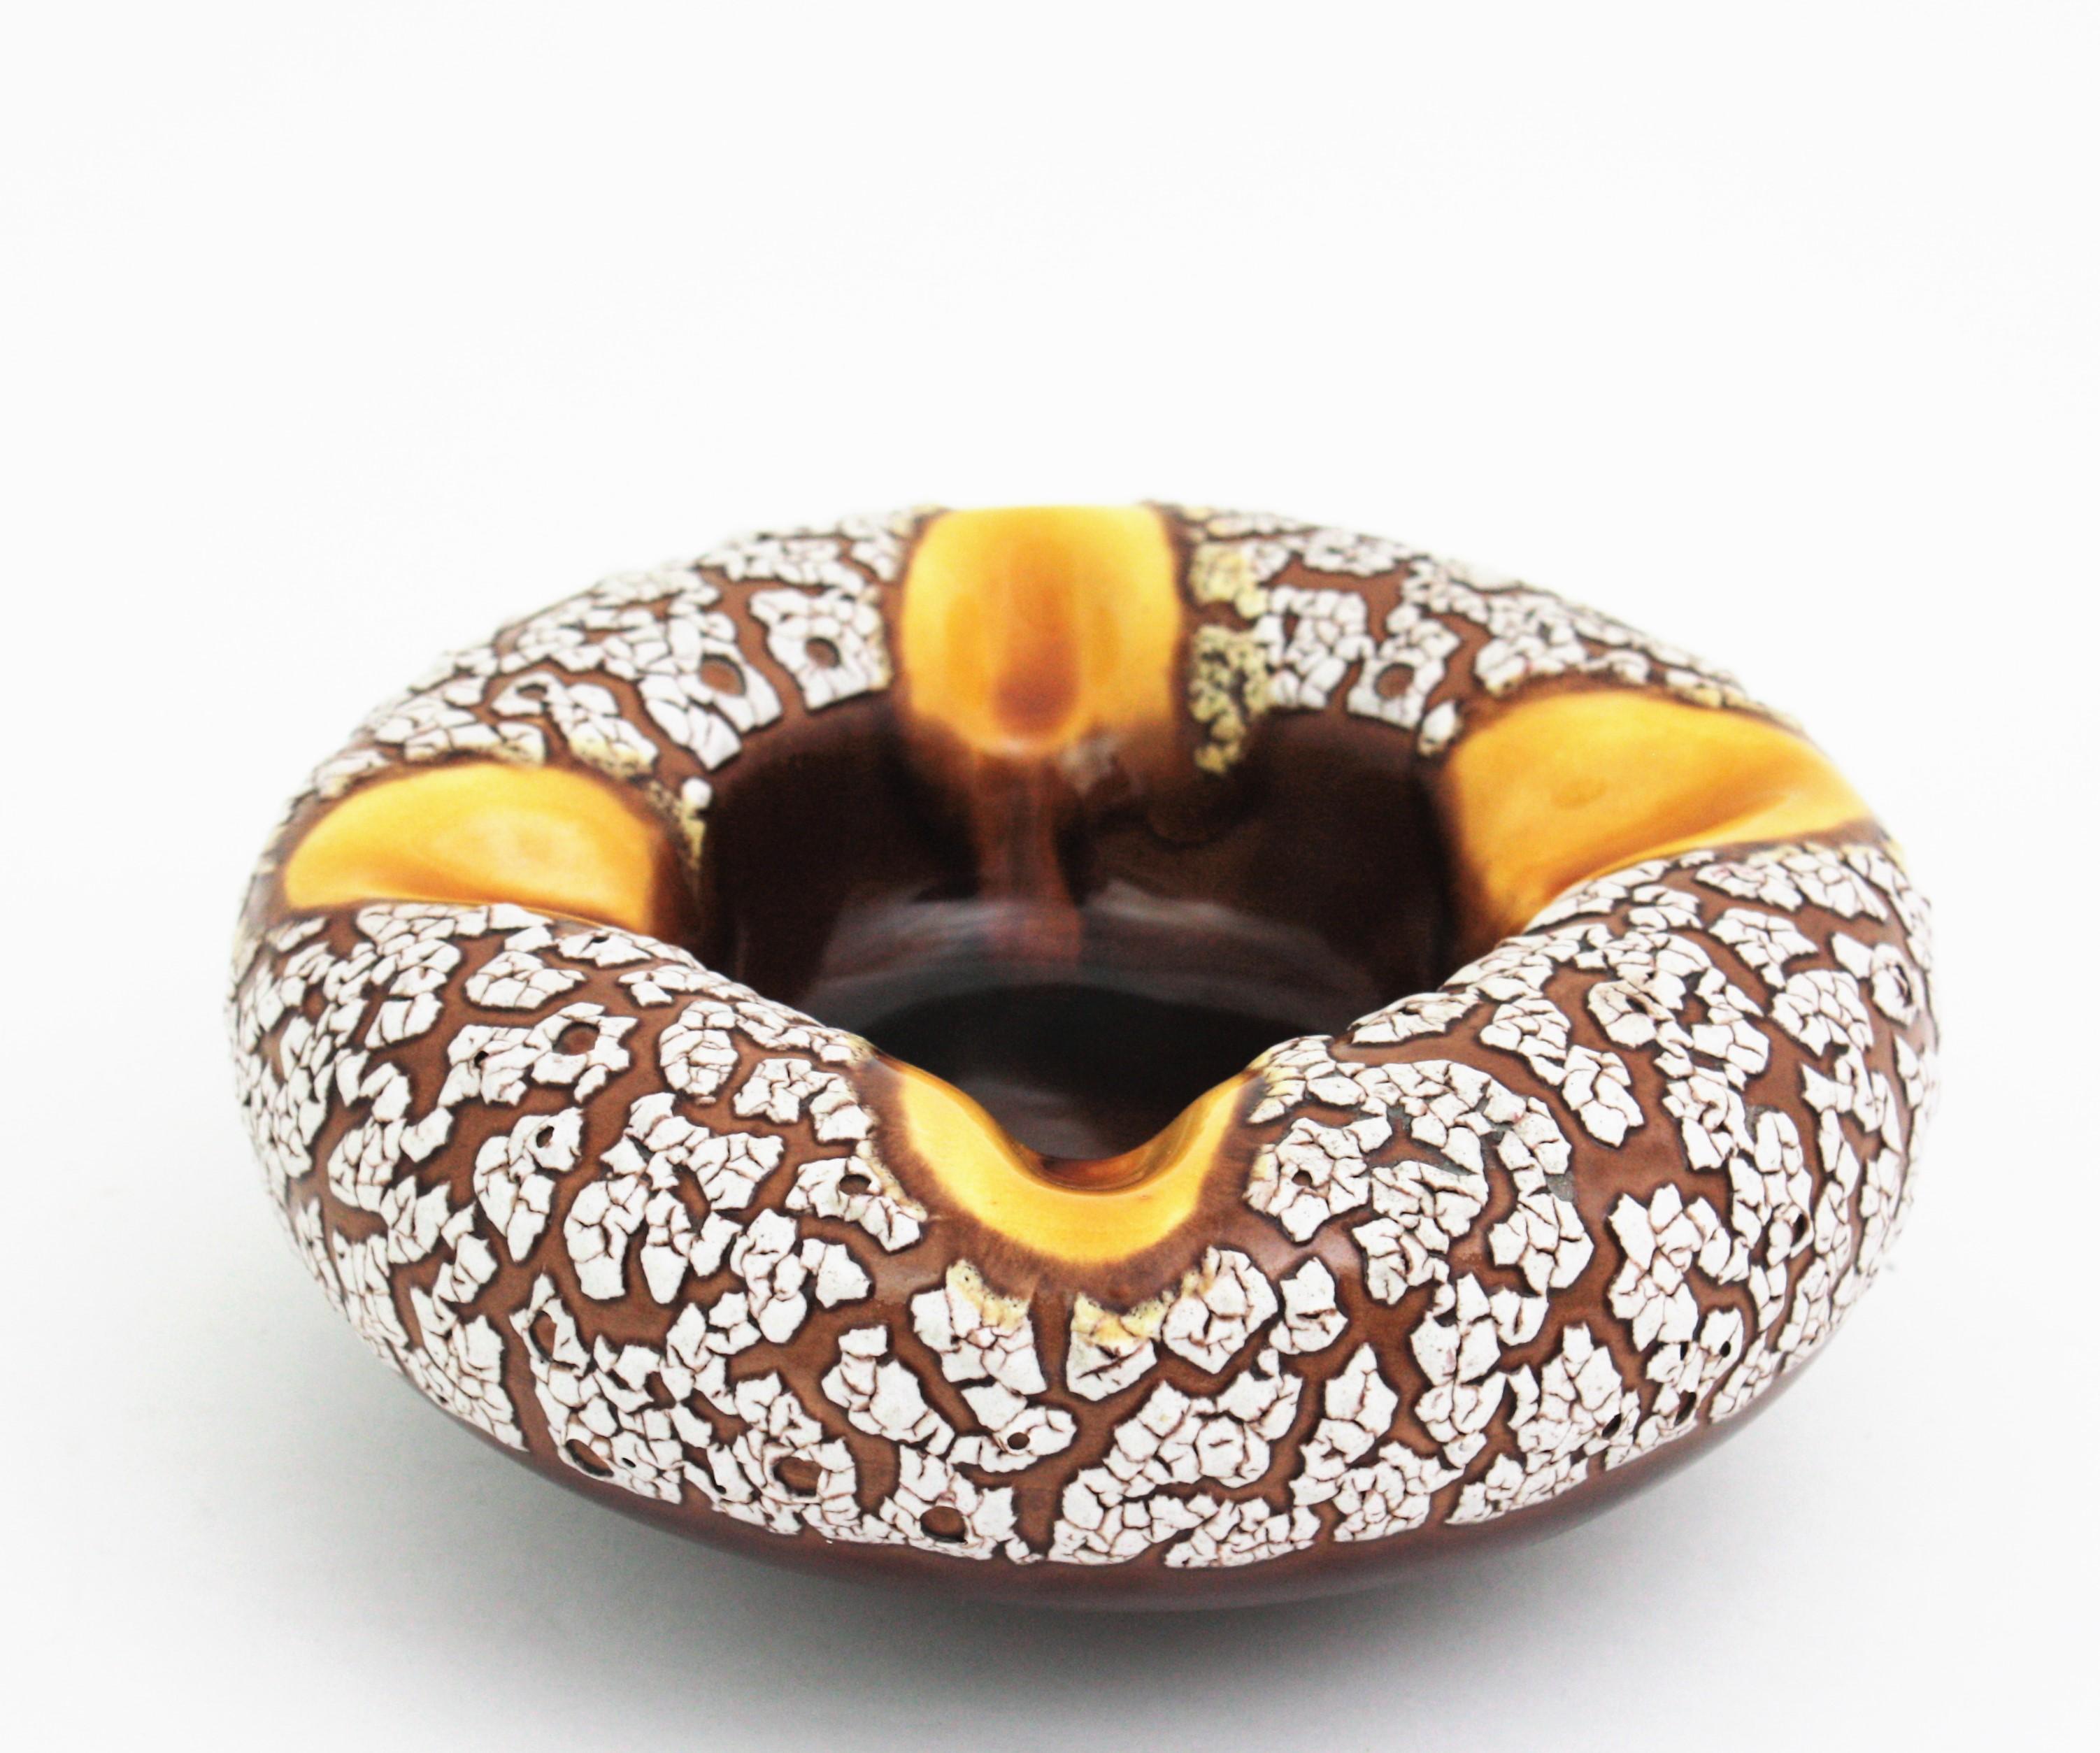 French Vallauris Yellow White Brown Ceramic Fat Lava Round Ashtray / Bowl, 1950s For Sale